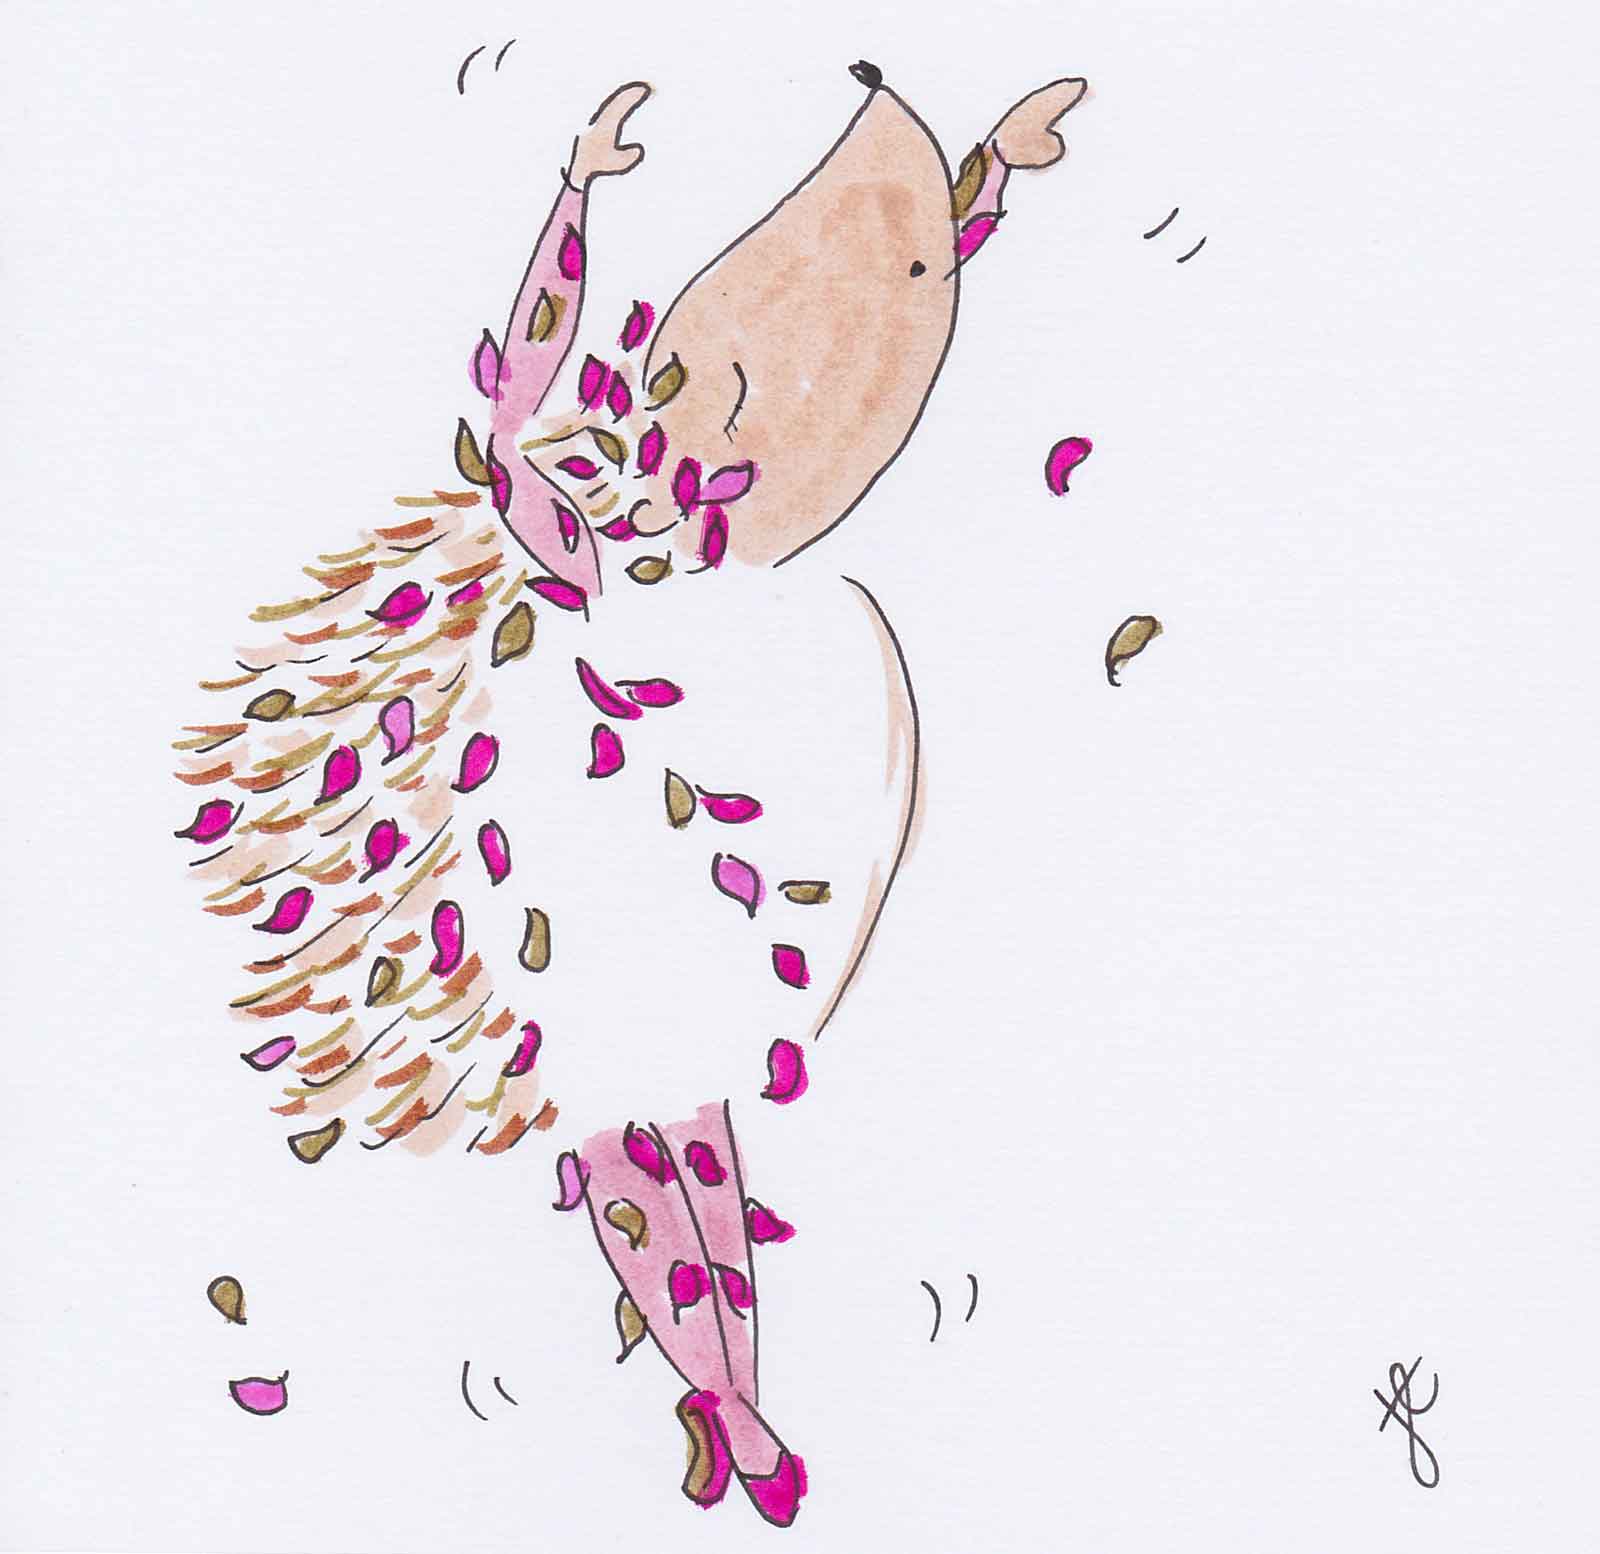 Ballettoons Hedgio illustration of dancing hedgehog mid-leap in rose spectre costume